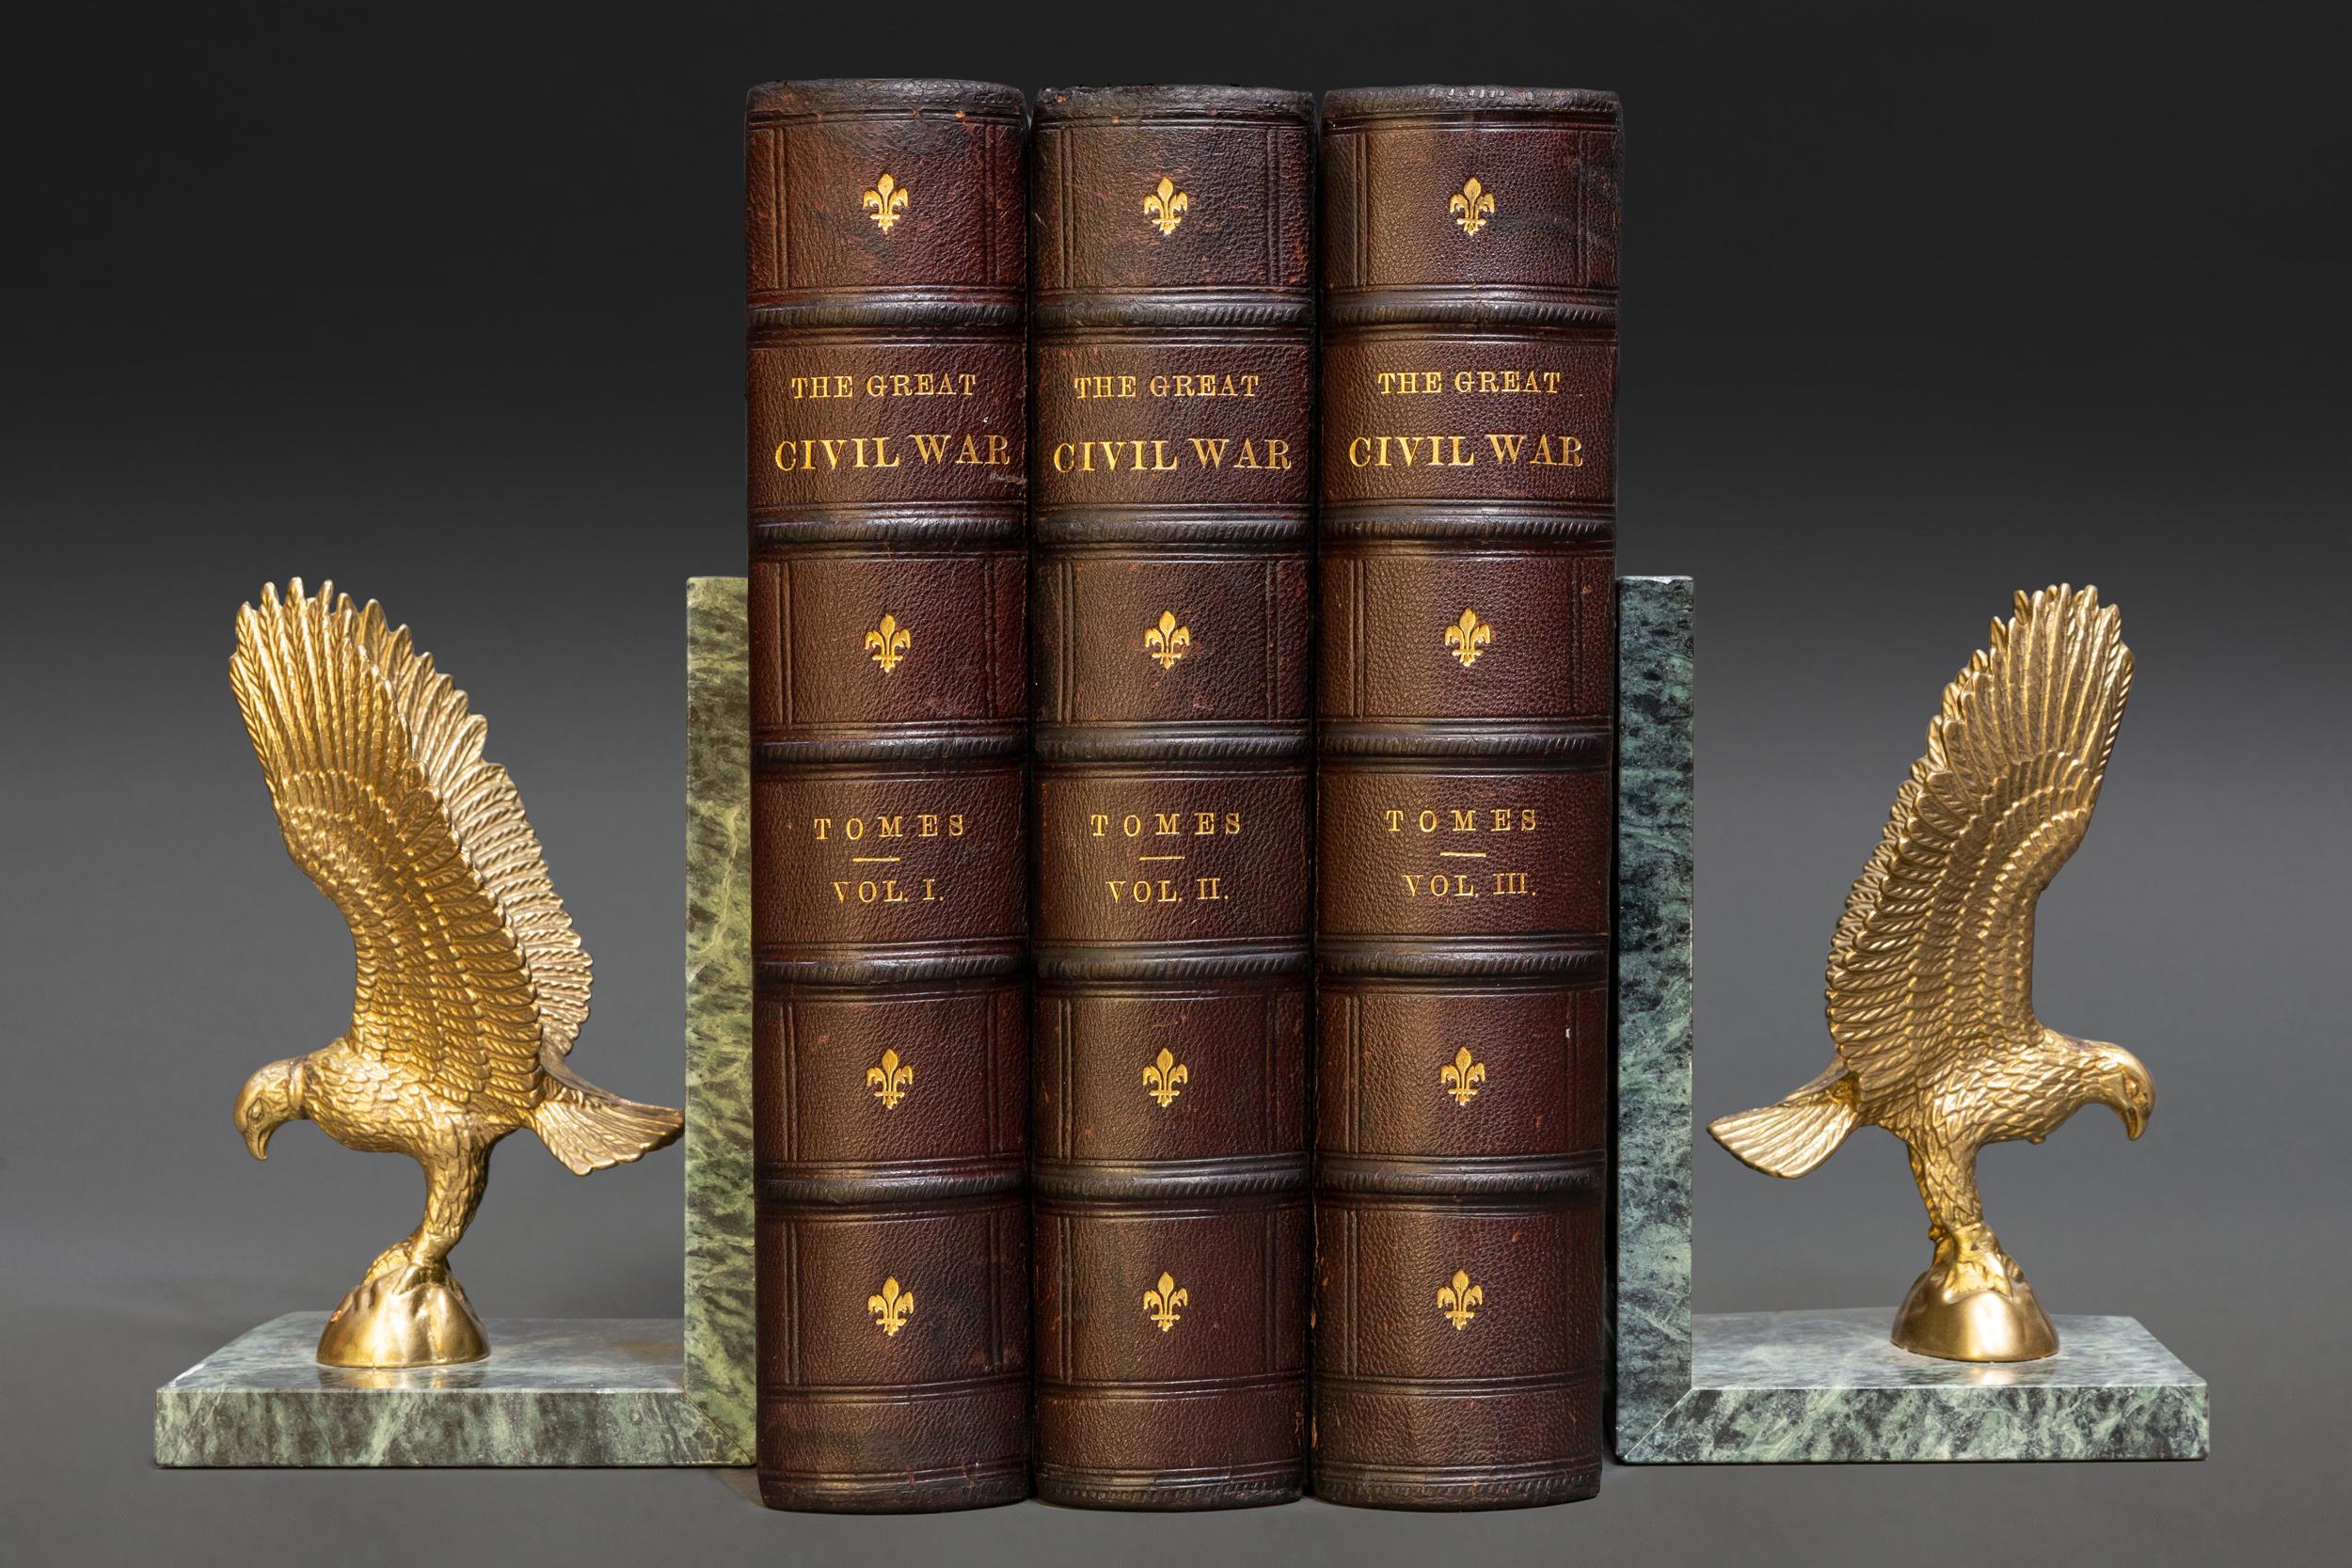 3 Volumes. Robert Tomes, M.D. and Benjamin G. Smith. The Great Civil War: A History of The Late Rebellion. Bound in full brown morocco. Blind tooling on cover. Gilt American Eagle on covers. Marbled endpapers and edges. Raised bands. Illustrated.